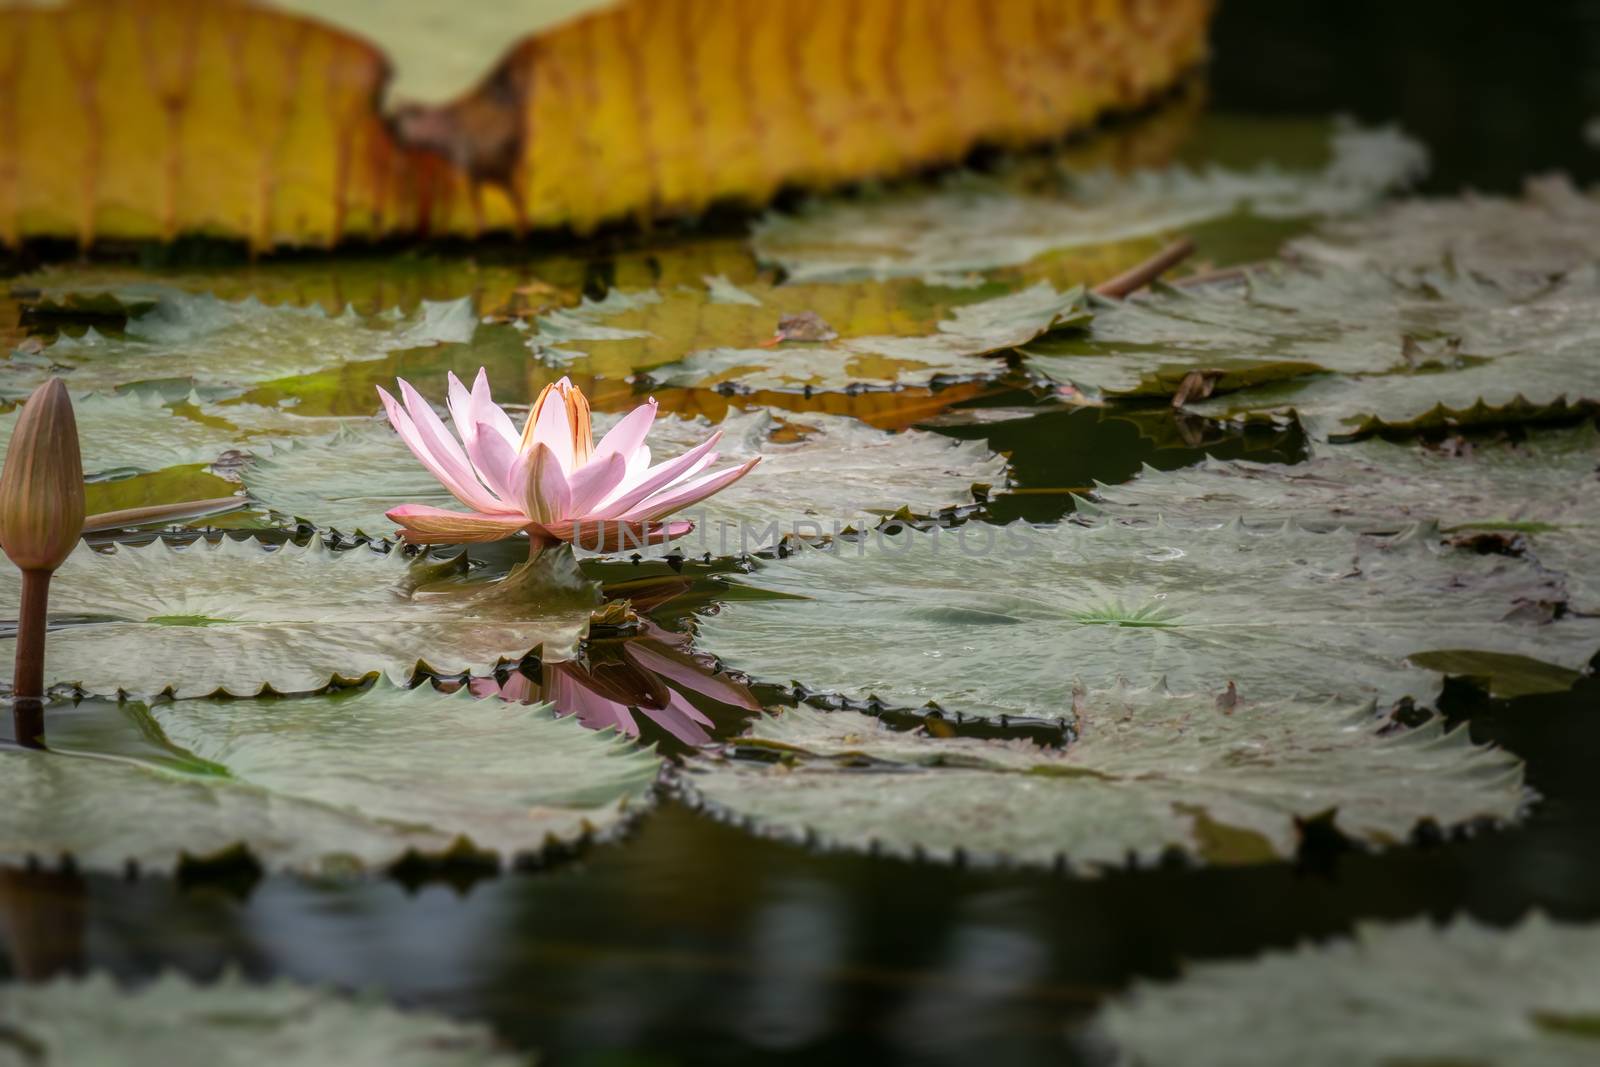 An image of a beautiful pink water lily in the garden pond